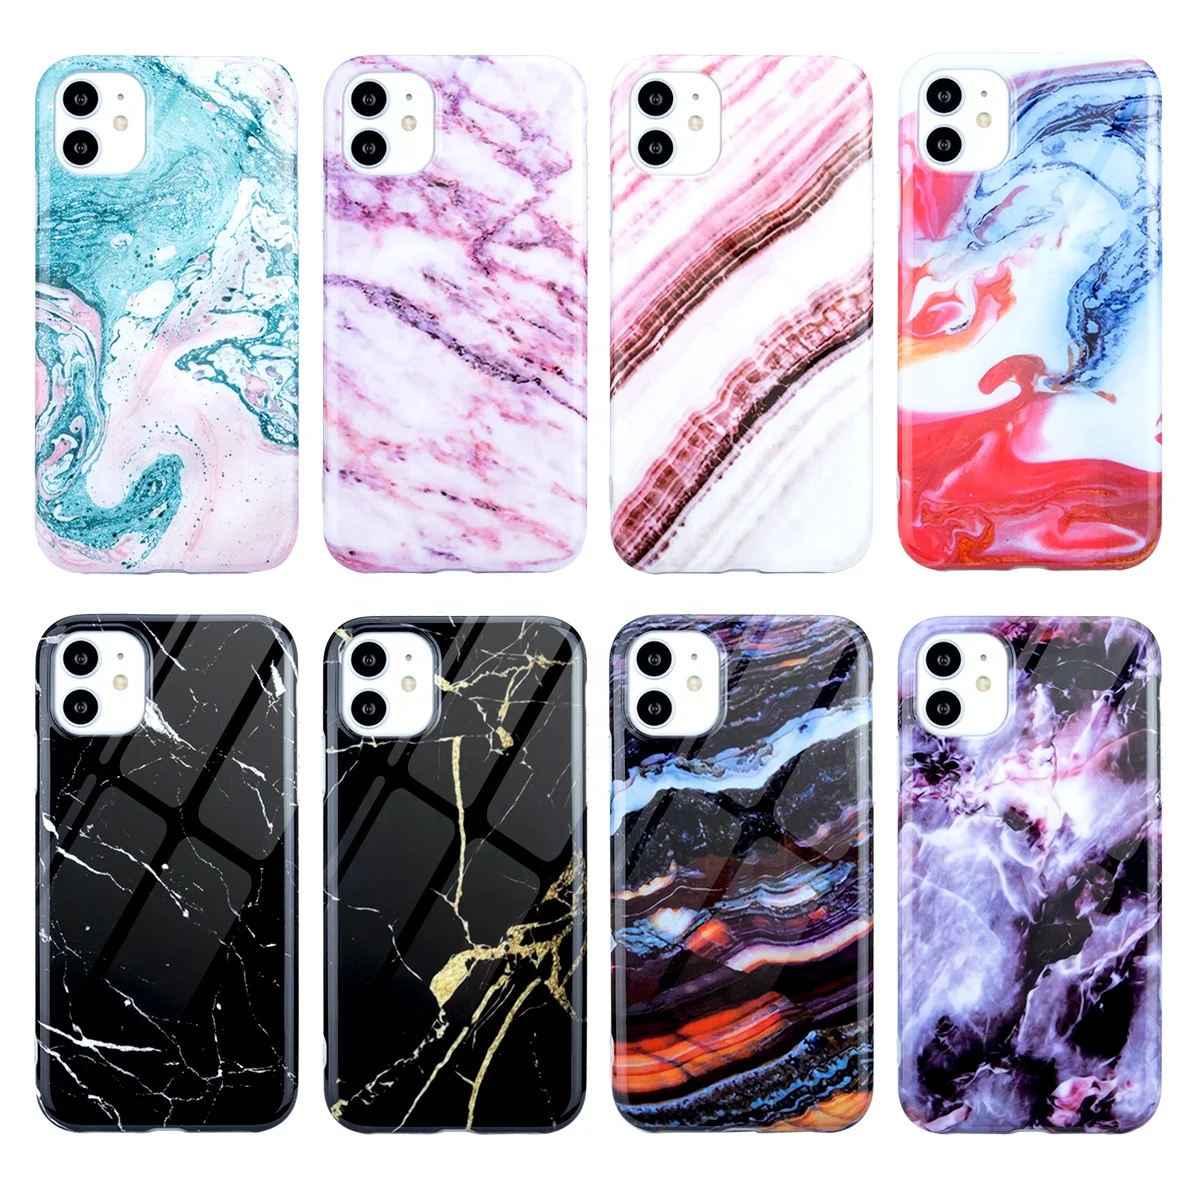 

New Style IMD Printing Marble Grain Elastic TPU Fashion Grip Phone Case for iPhone 11 12 Back Cover, Multi colors